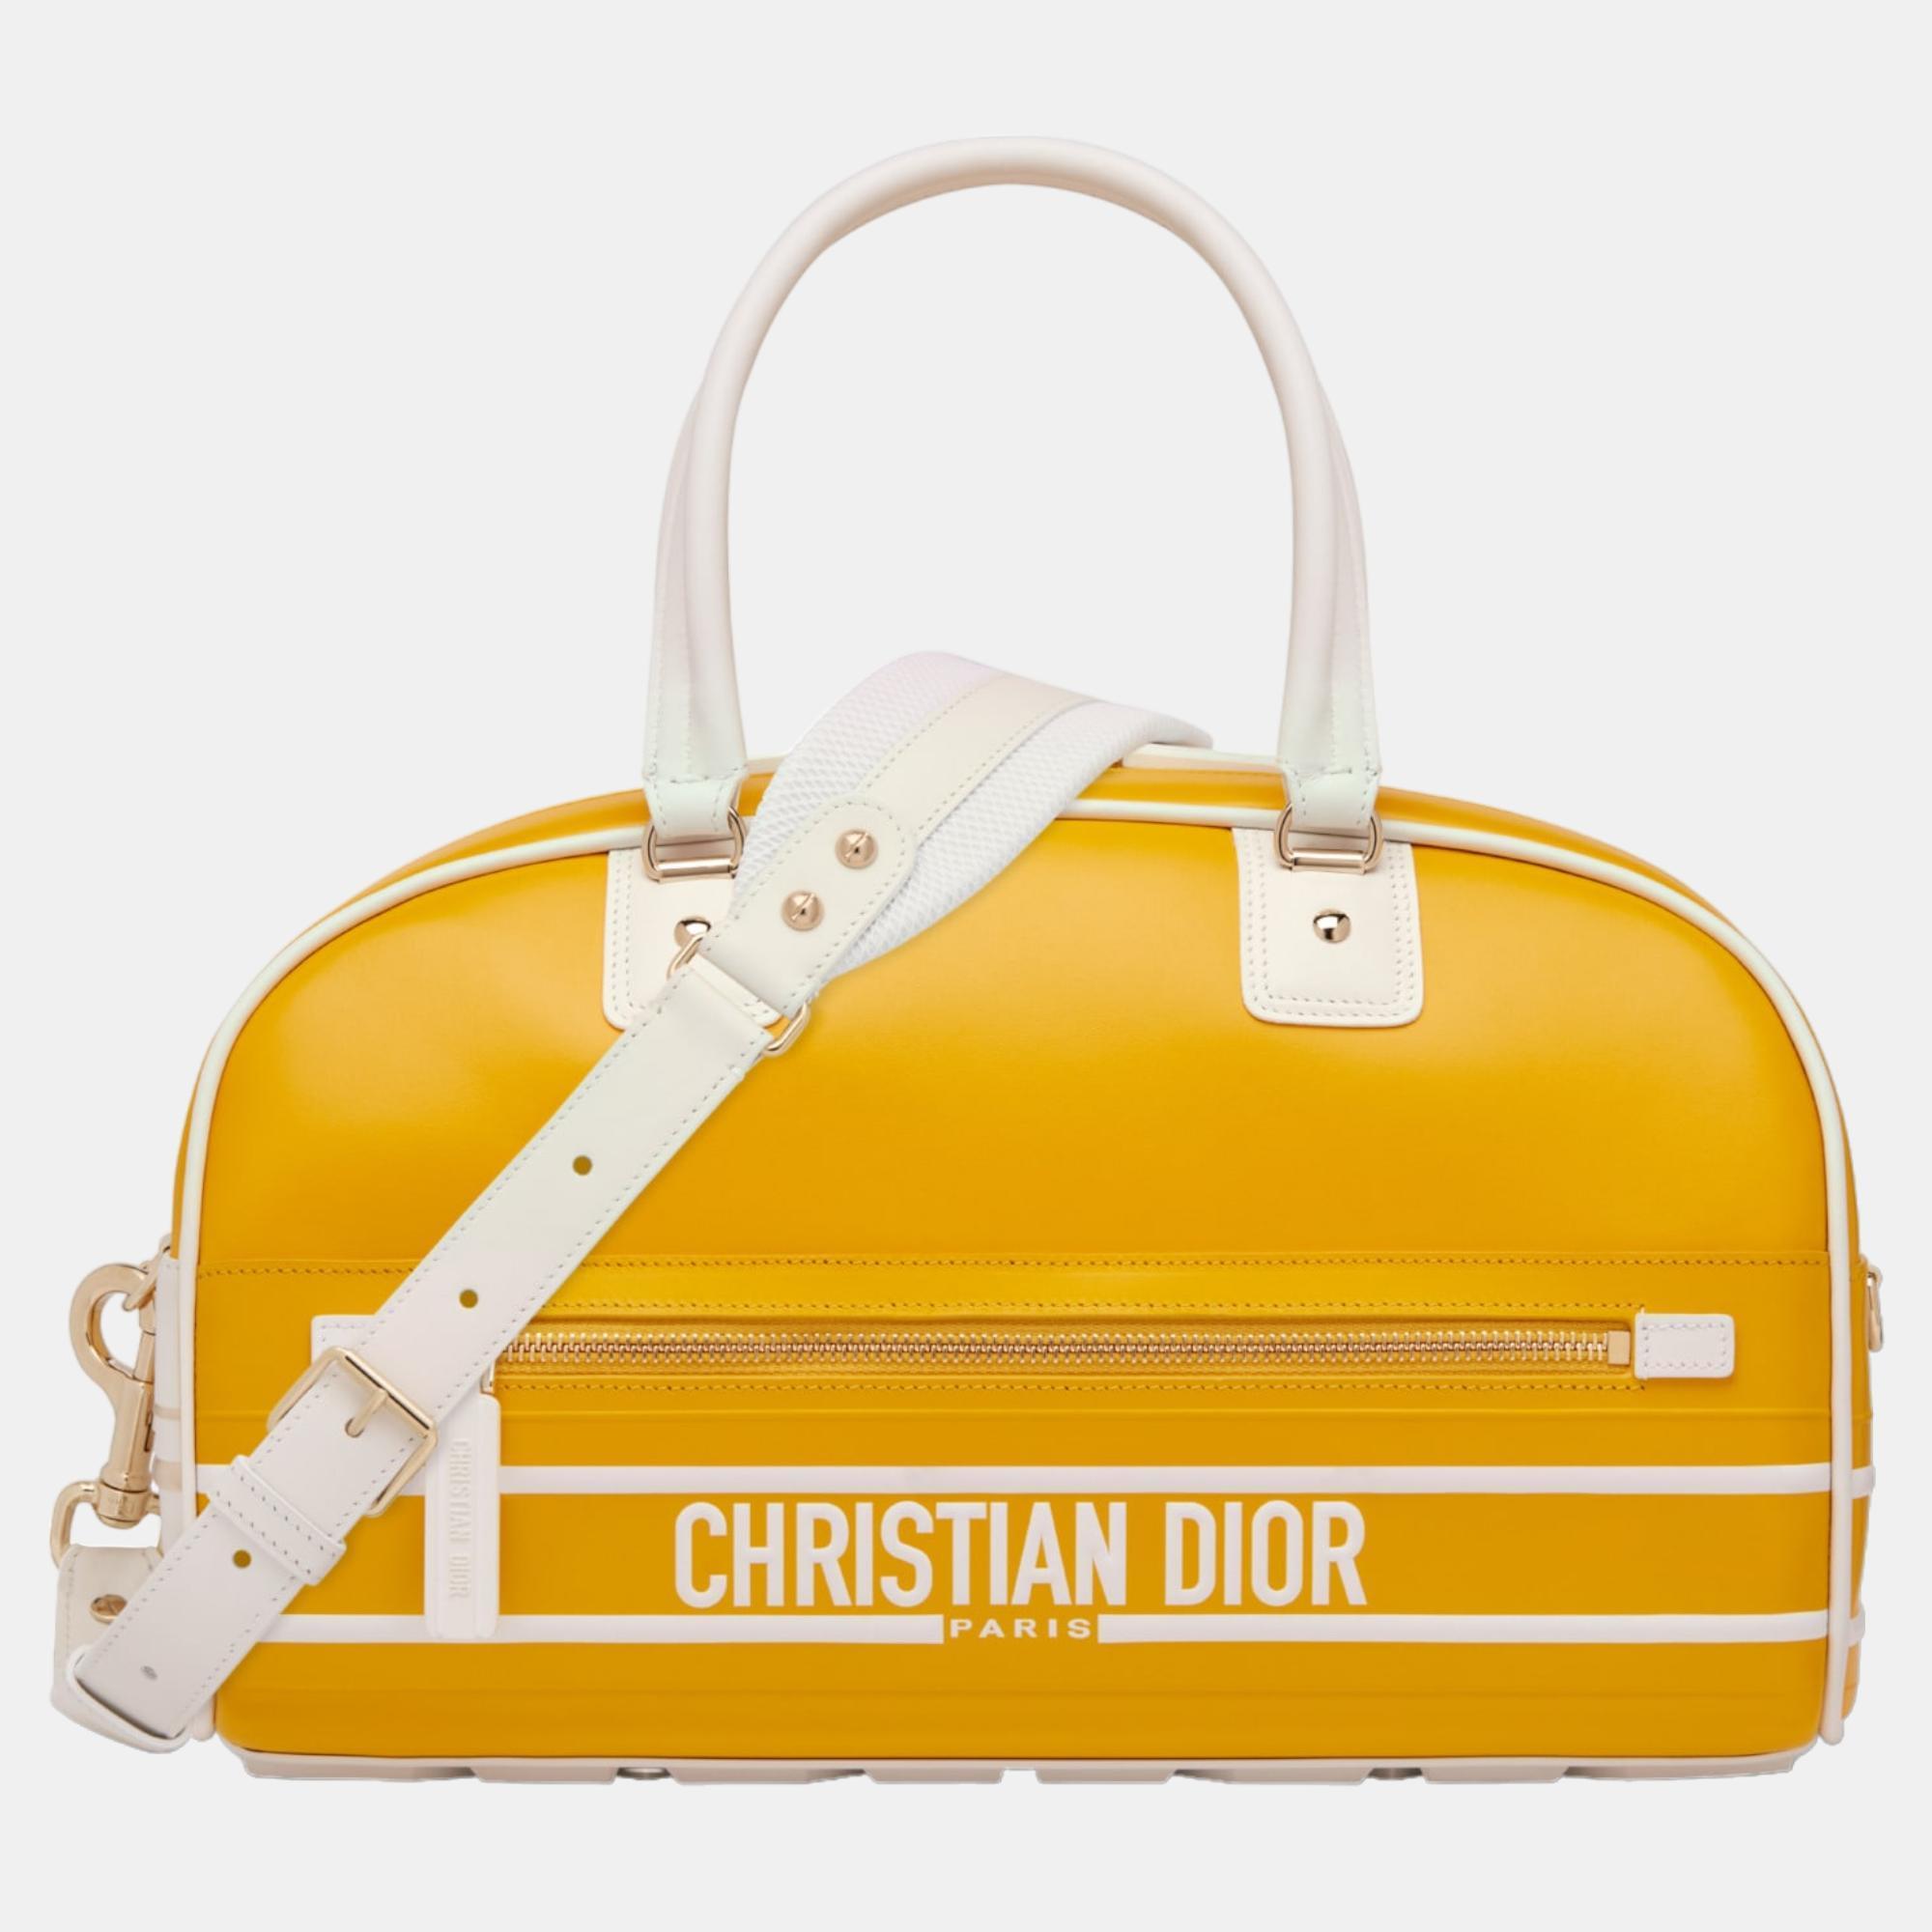 SMALL DIOR Yellow Calfskin with Embossed 'CHRISTIAN DIOR' Signature VIBE BAG M6209OOBR930U